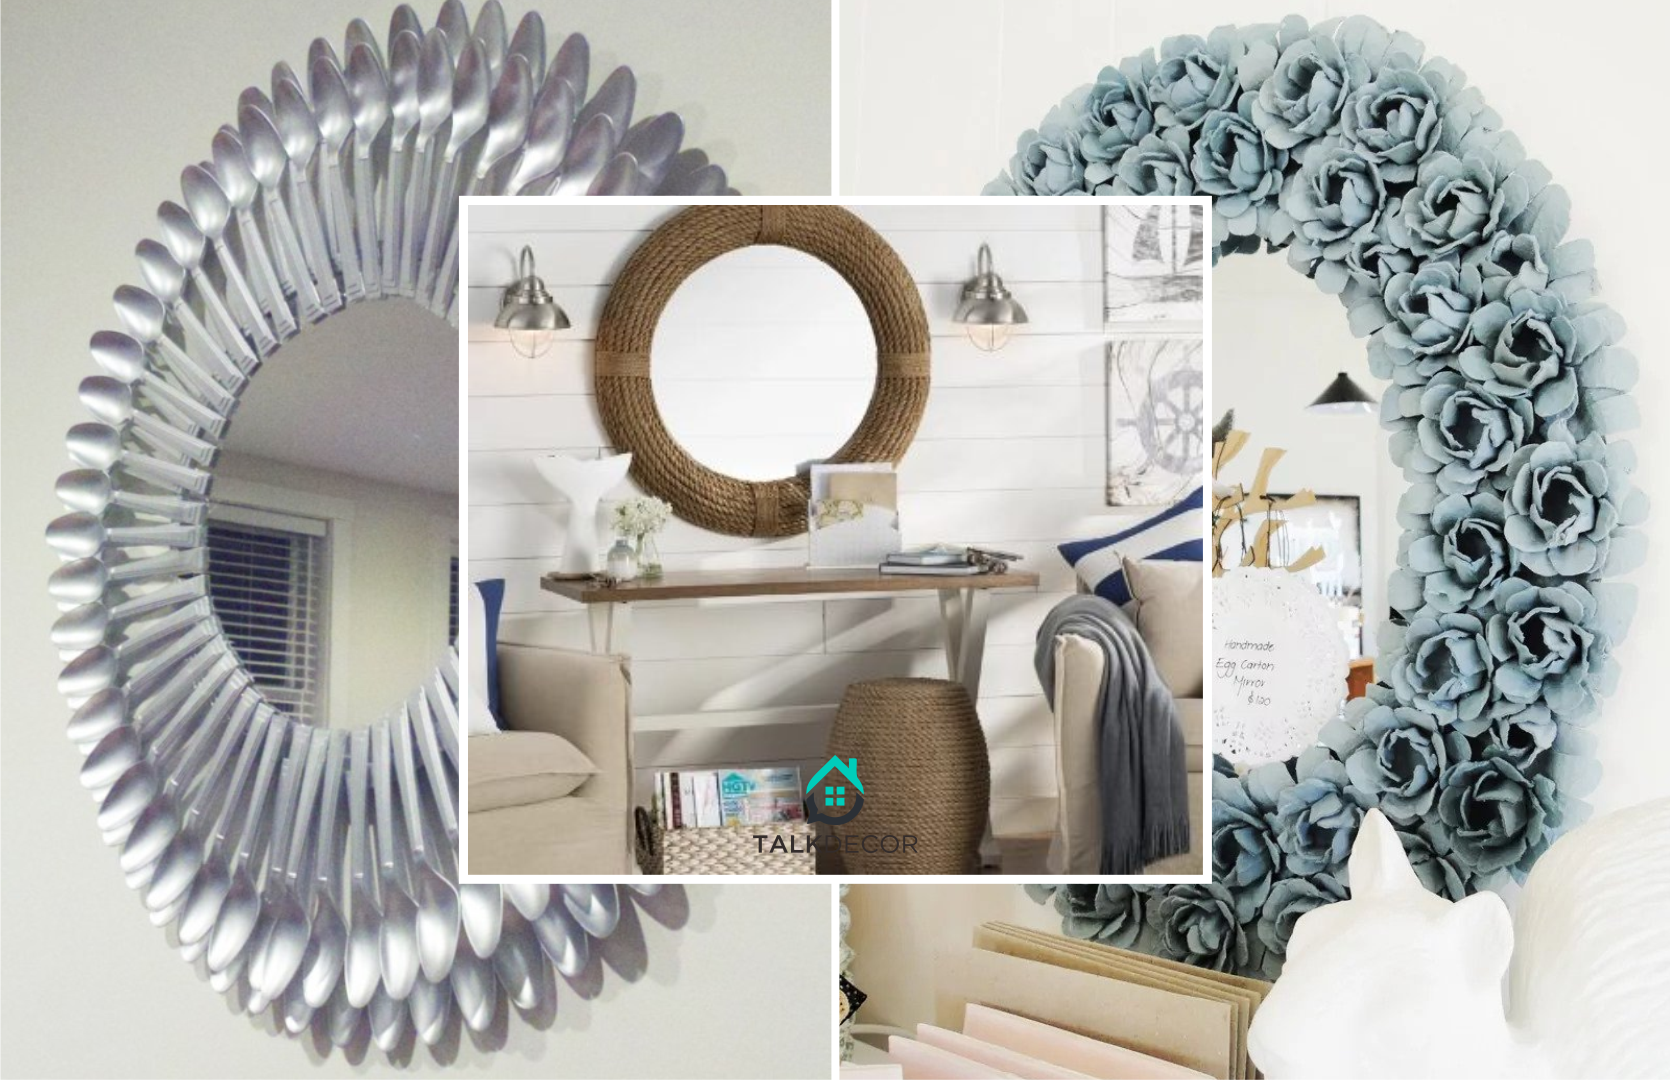 DIY Home Decor for Studio Apartment with Mirror